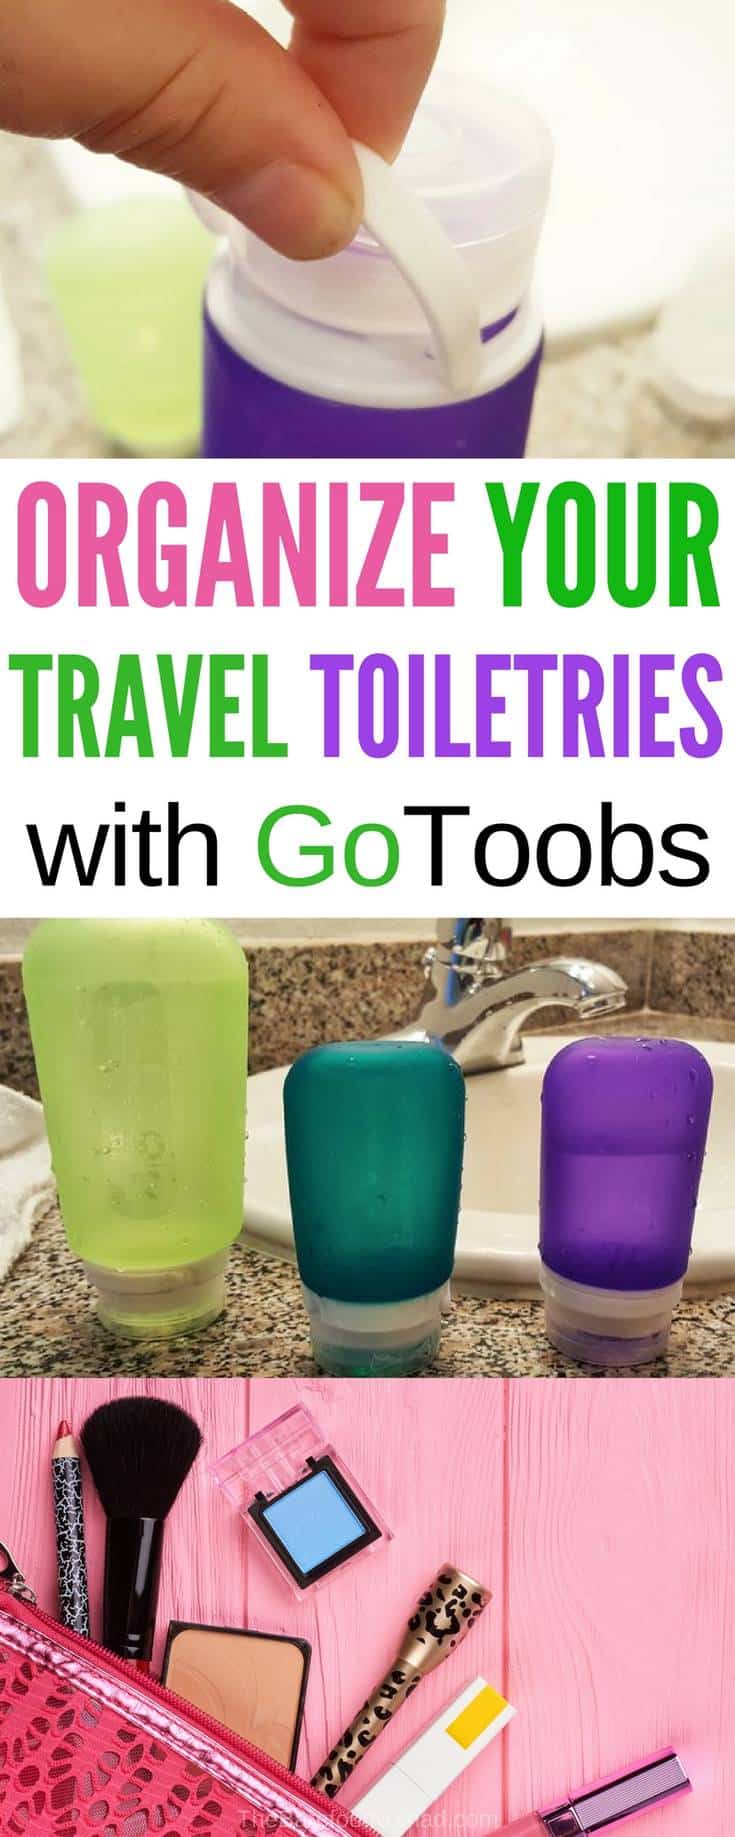 Our tips to organize your travel toiletries for carry on with GoToobs containers. They're cute, leak resistant, and great for storage for beauty products, shampoo and more.